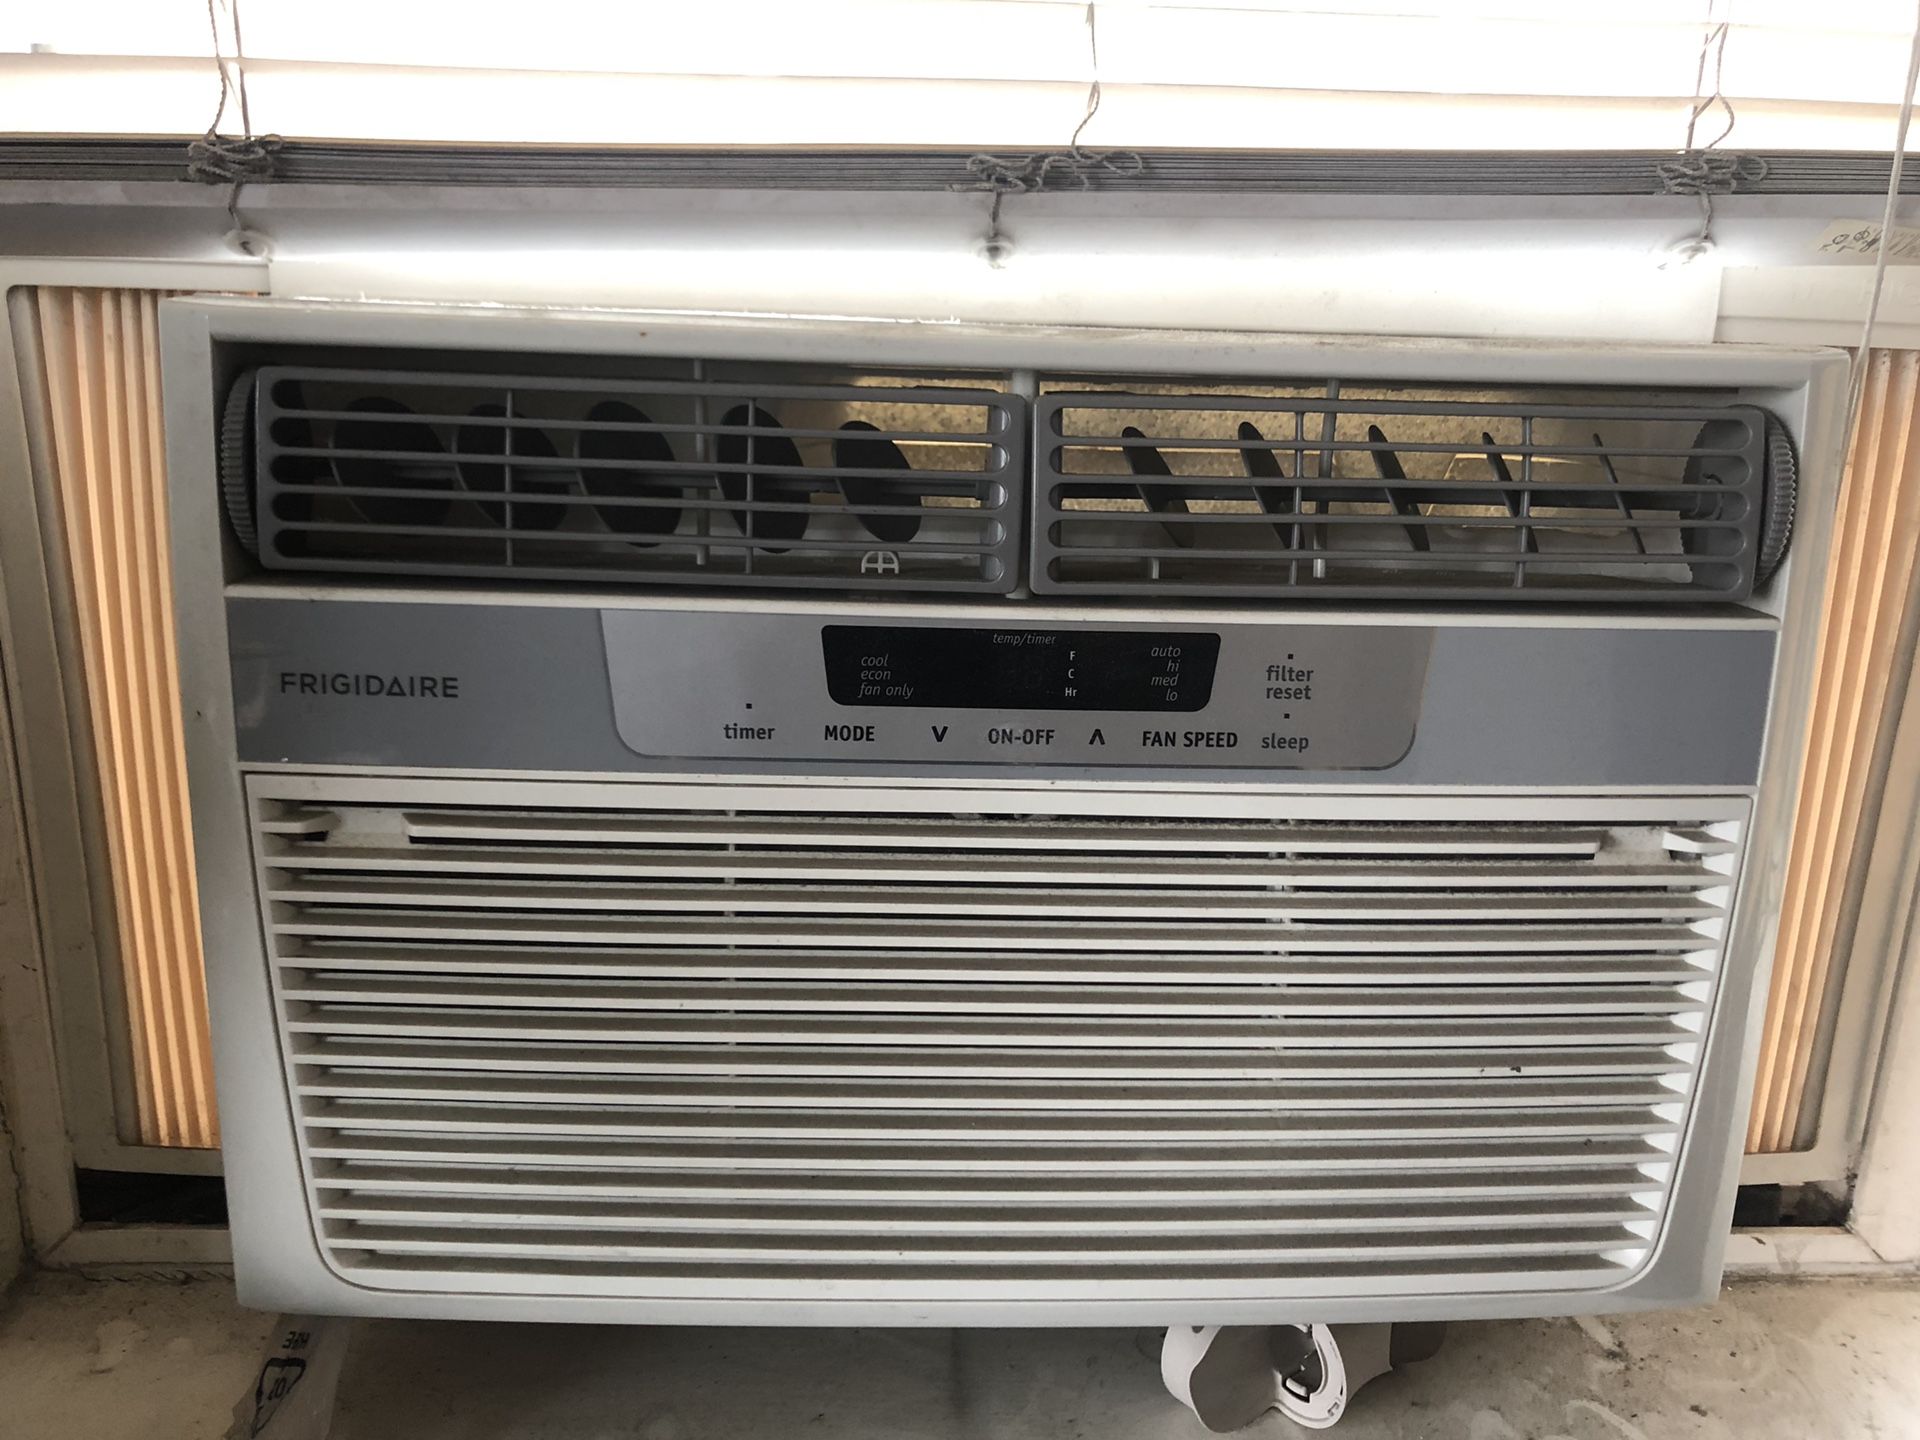 250 sqft window air conditioner (low use)